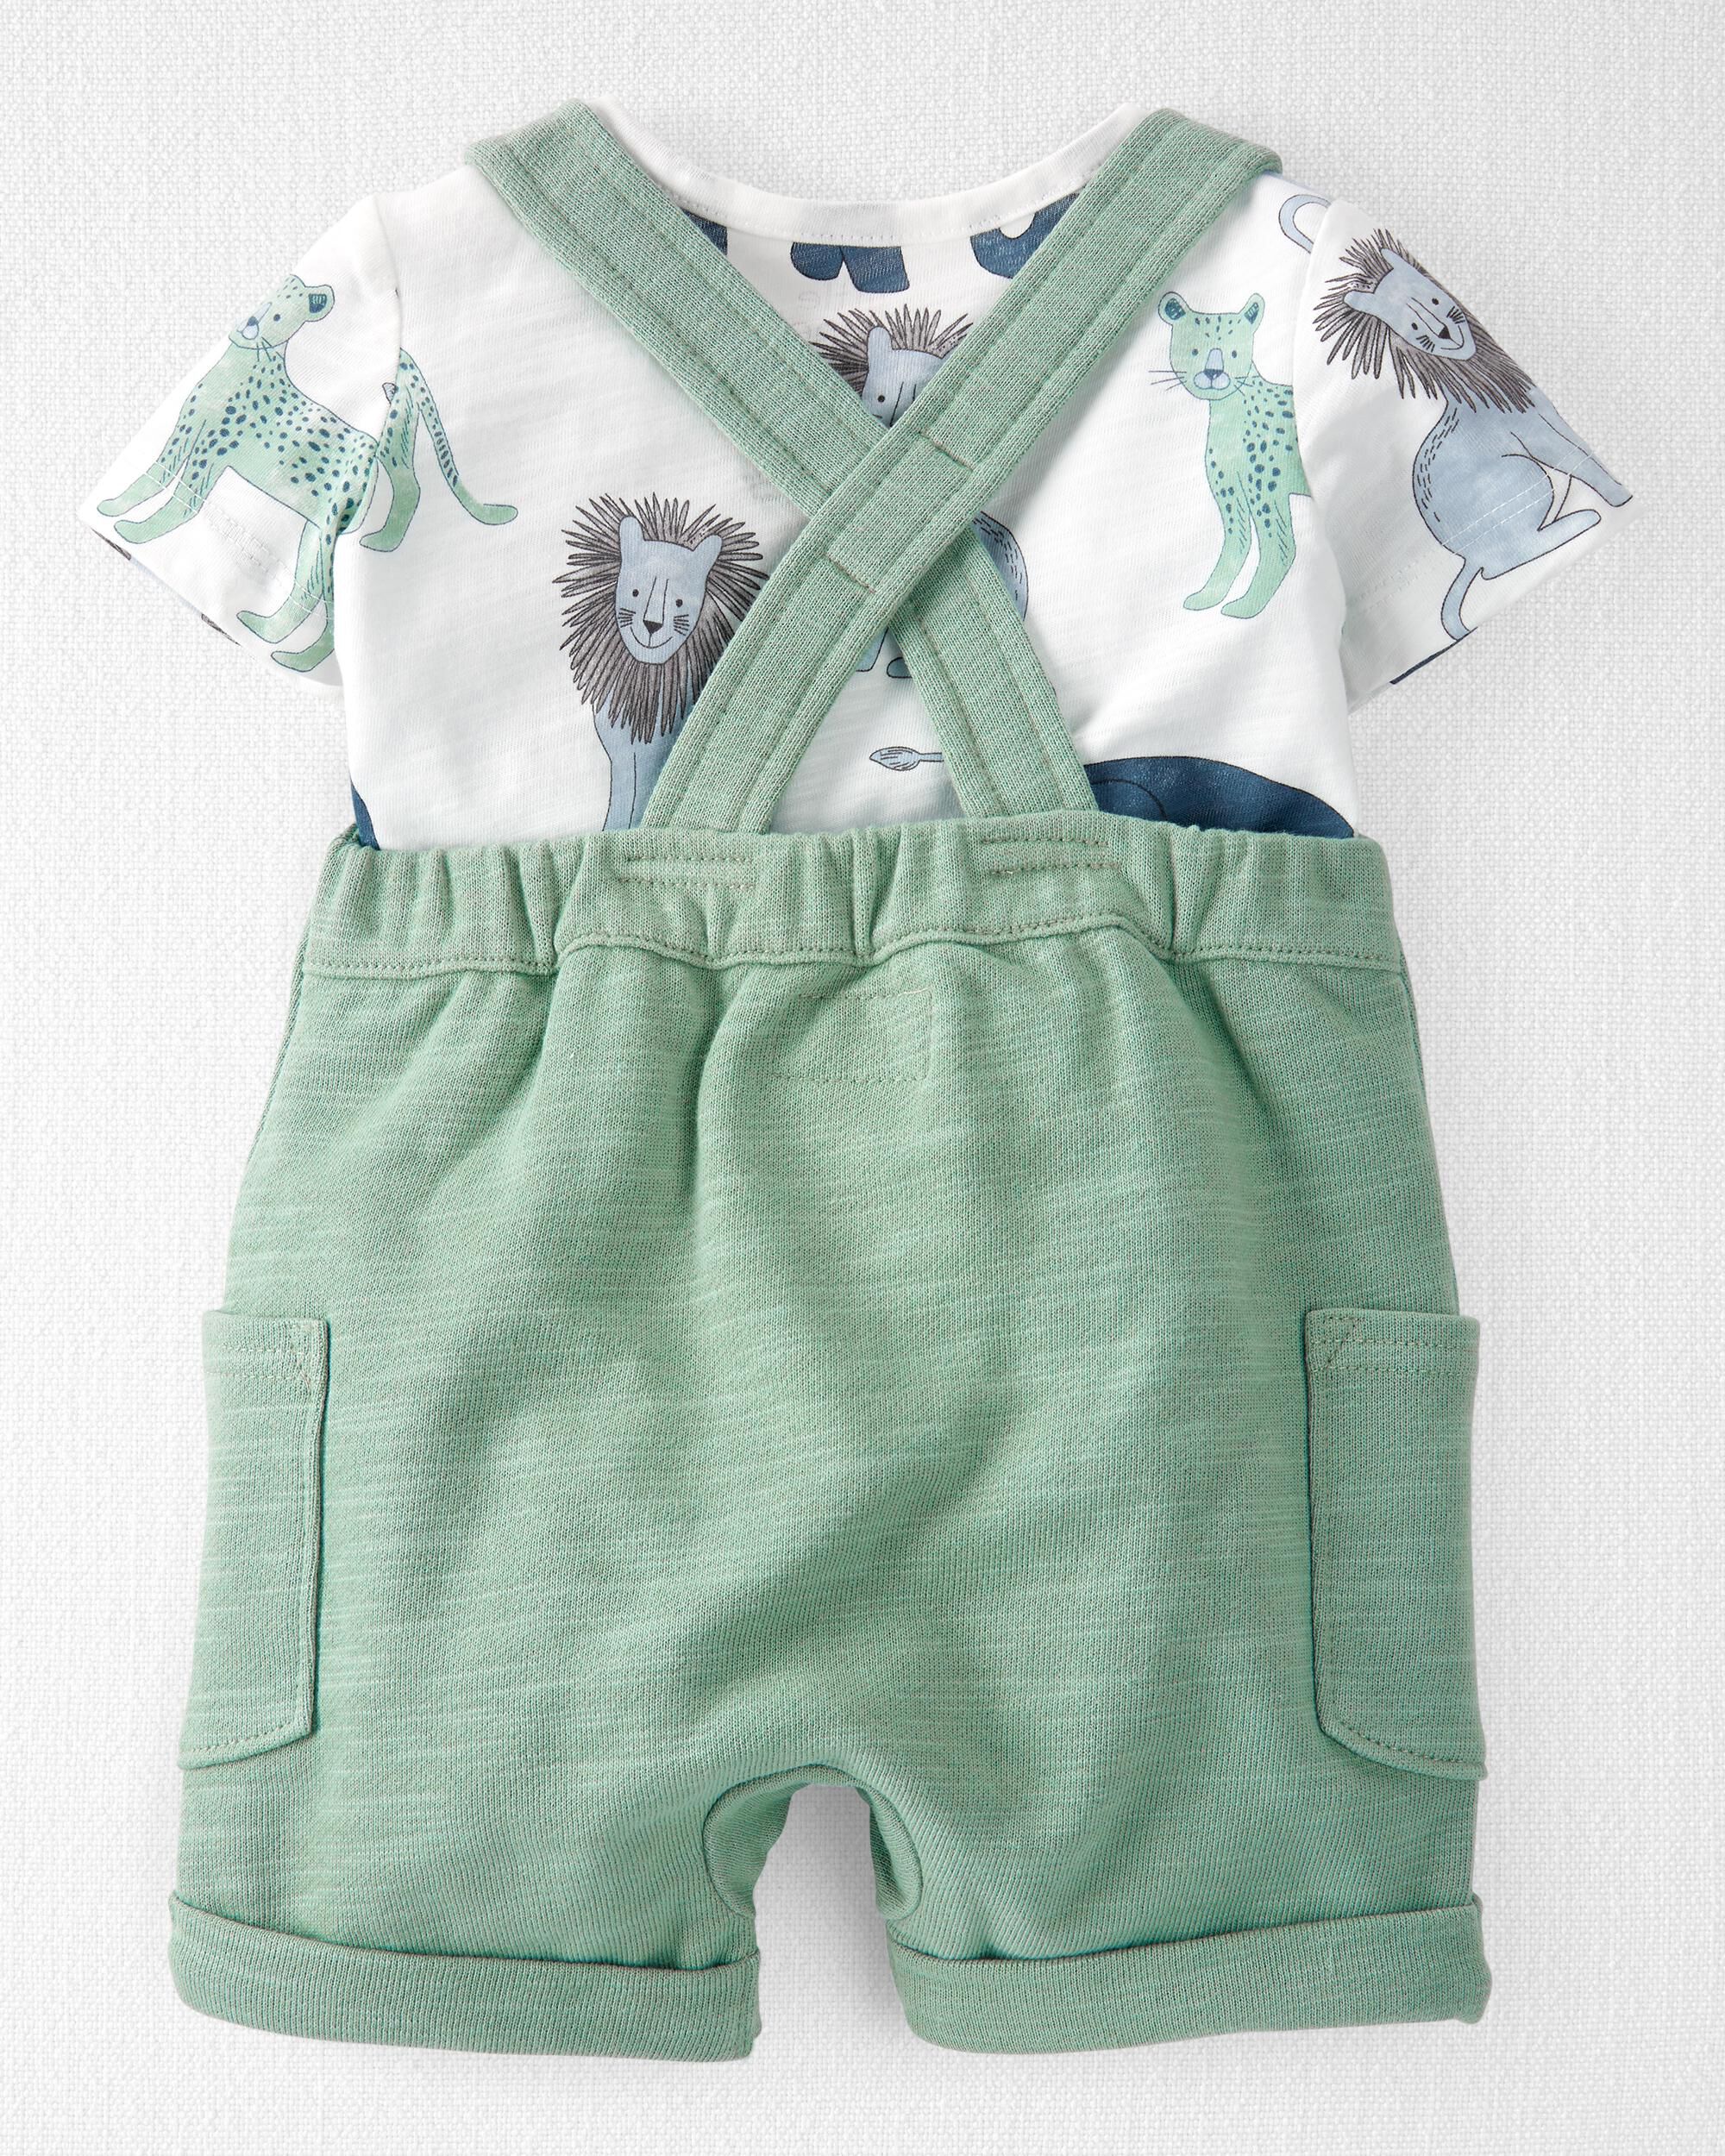 Details about   NEW CARTERS BOYS ONE PIECE ROMPER WITH COLLAR OUTFIT VARIOUS SIZES AND STYLES 